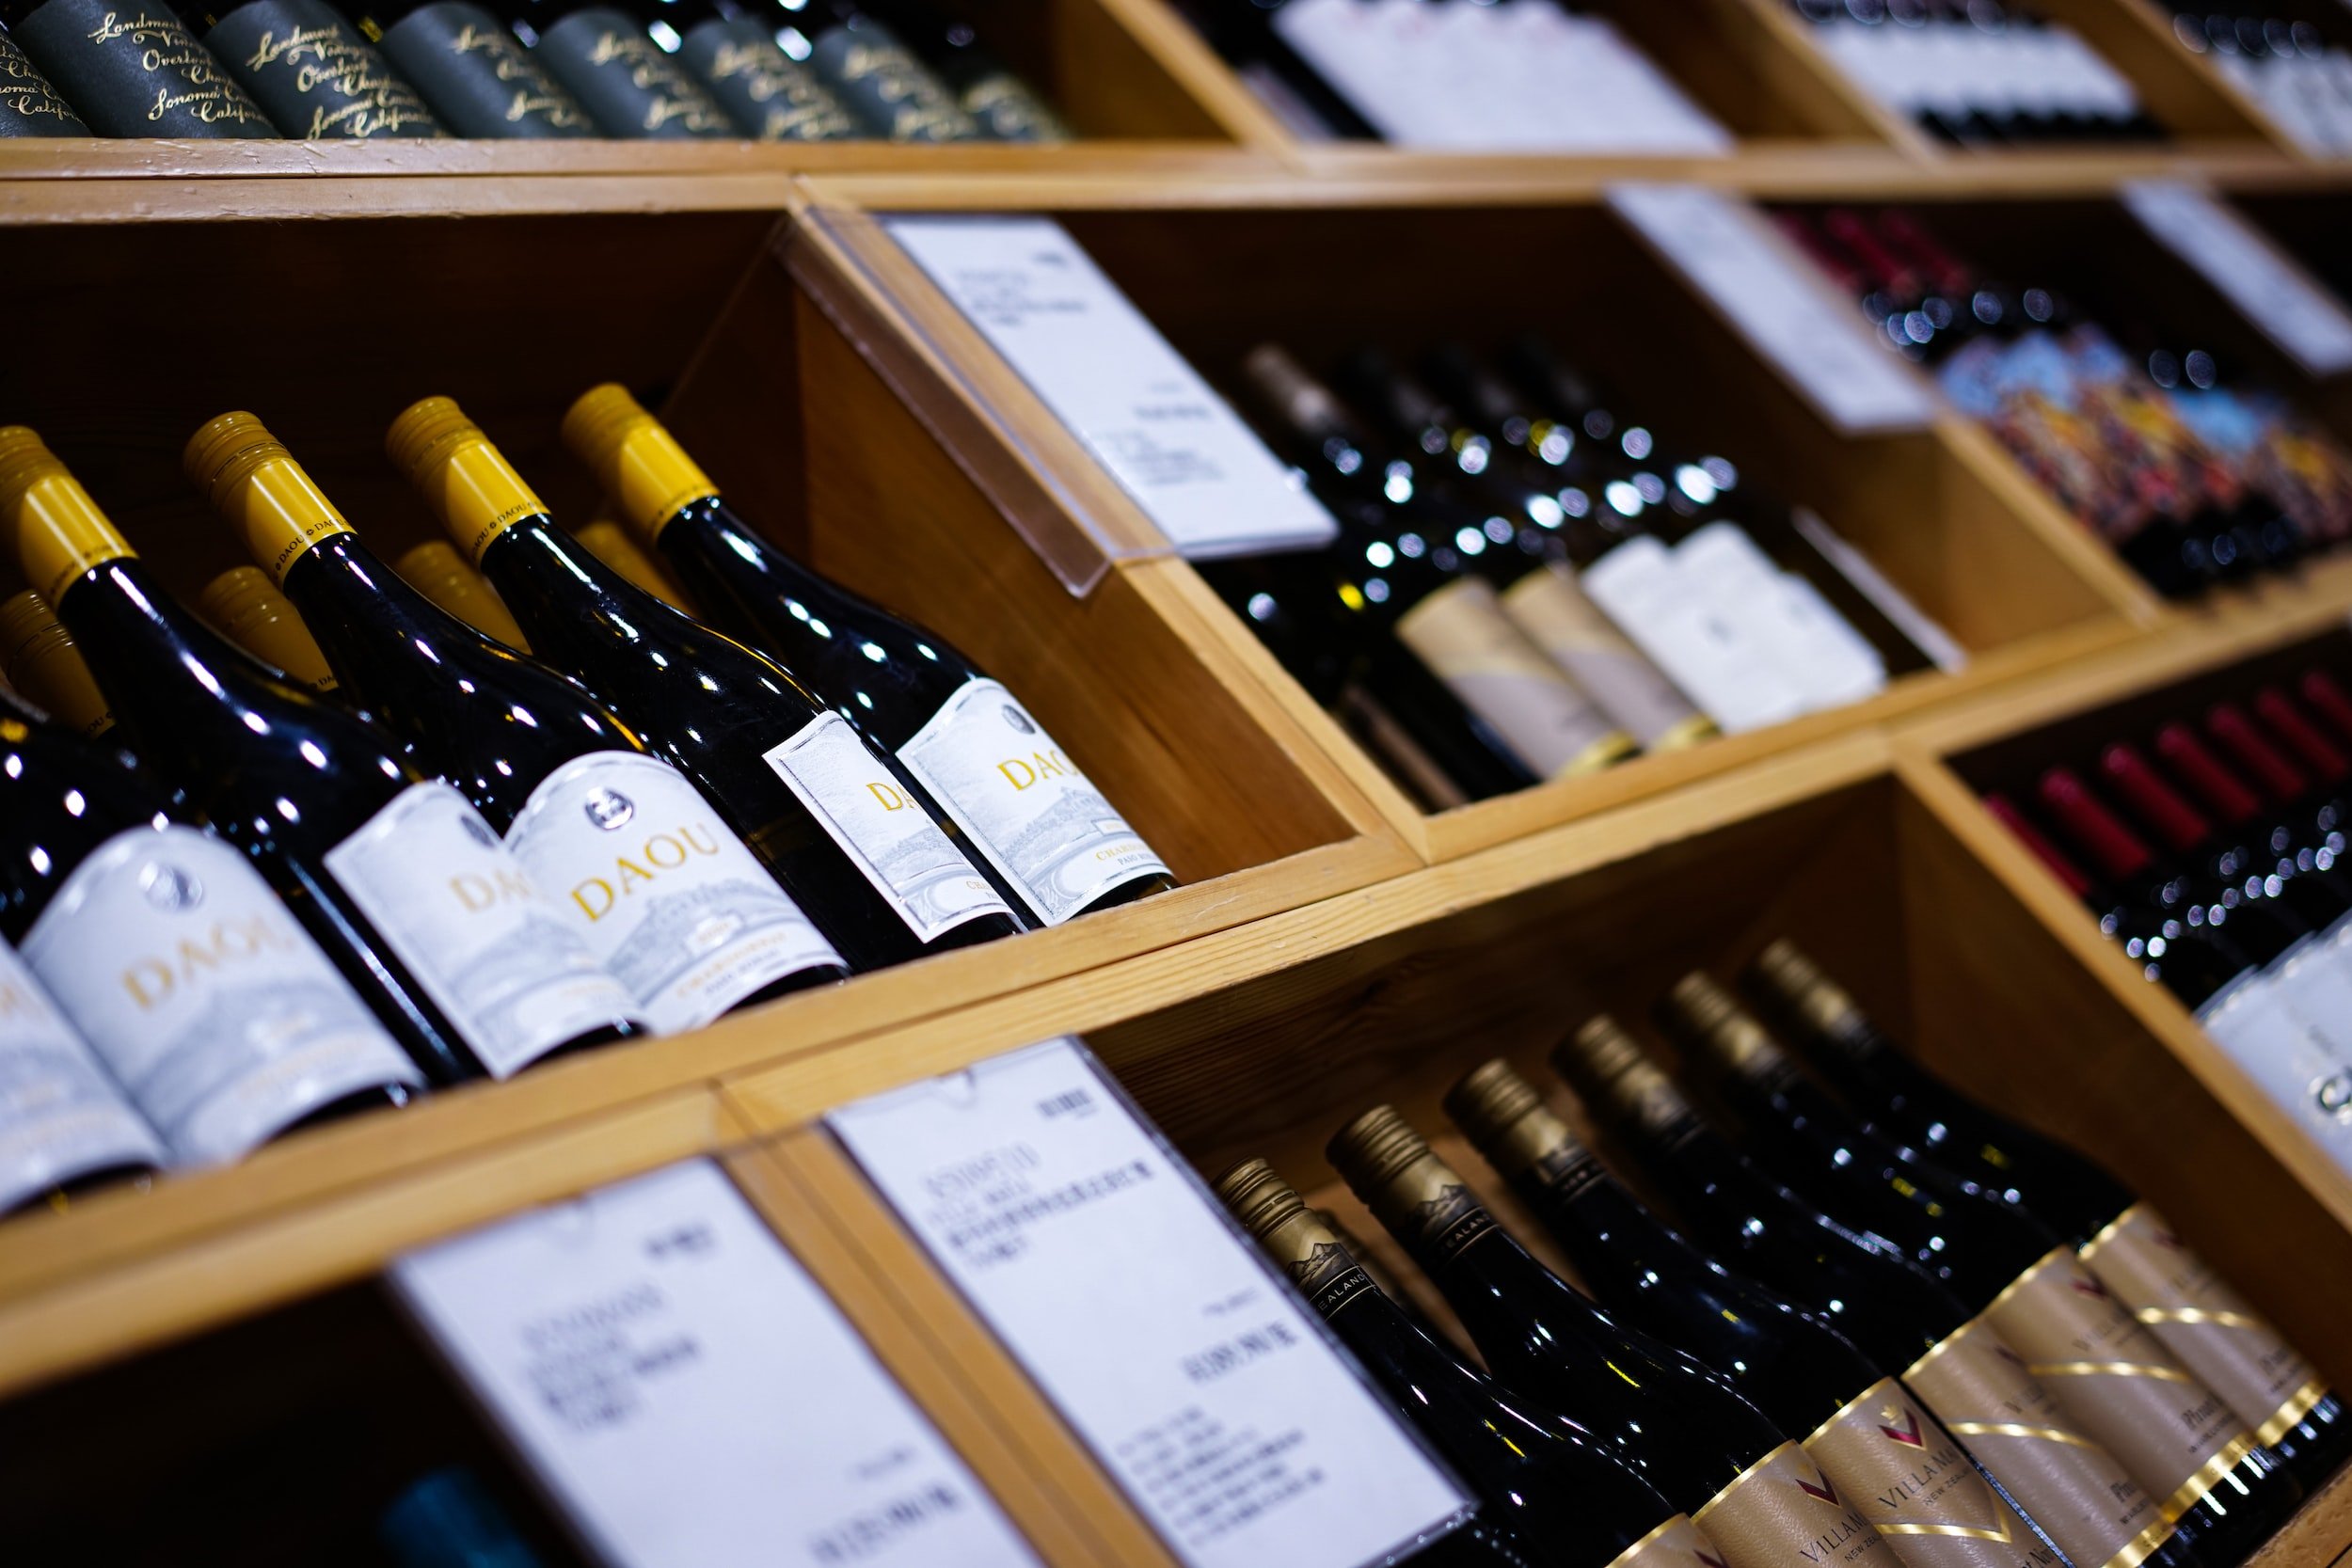 Recommend a $50 bottle of wine for a special occasion - shelf